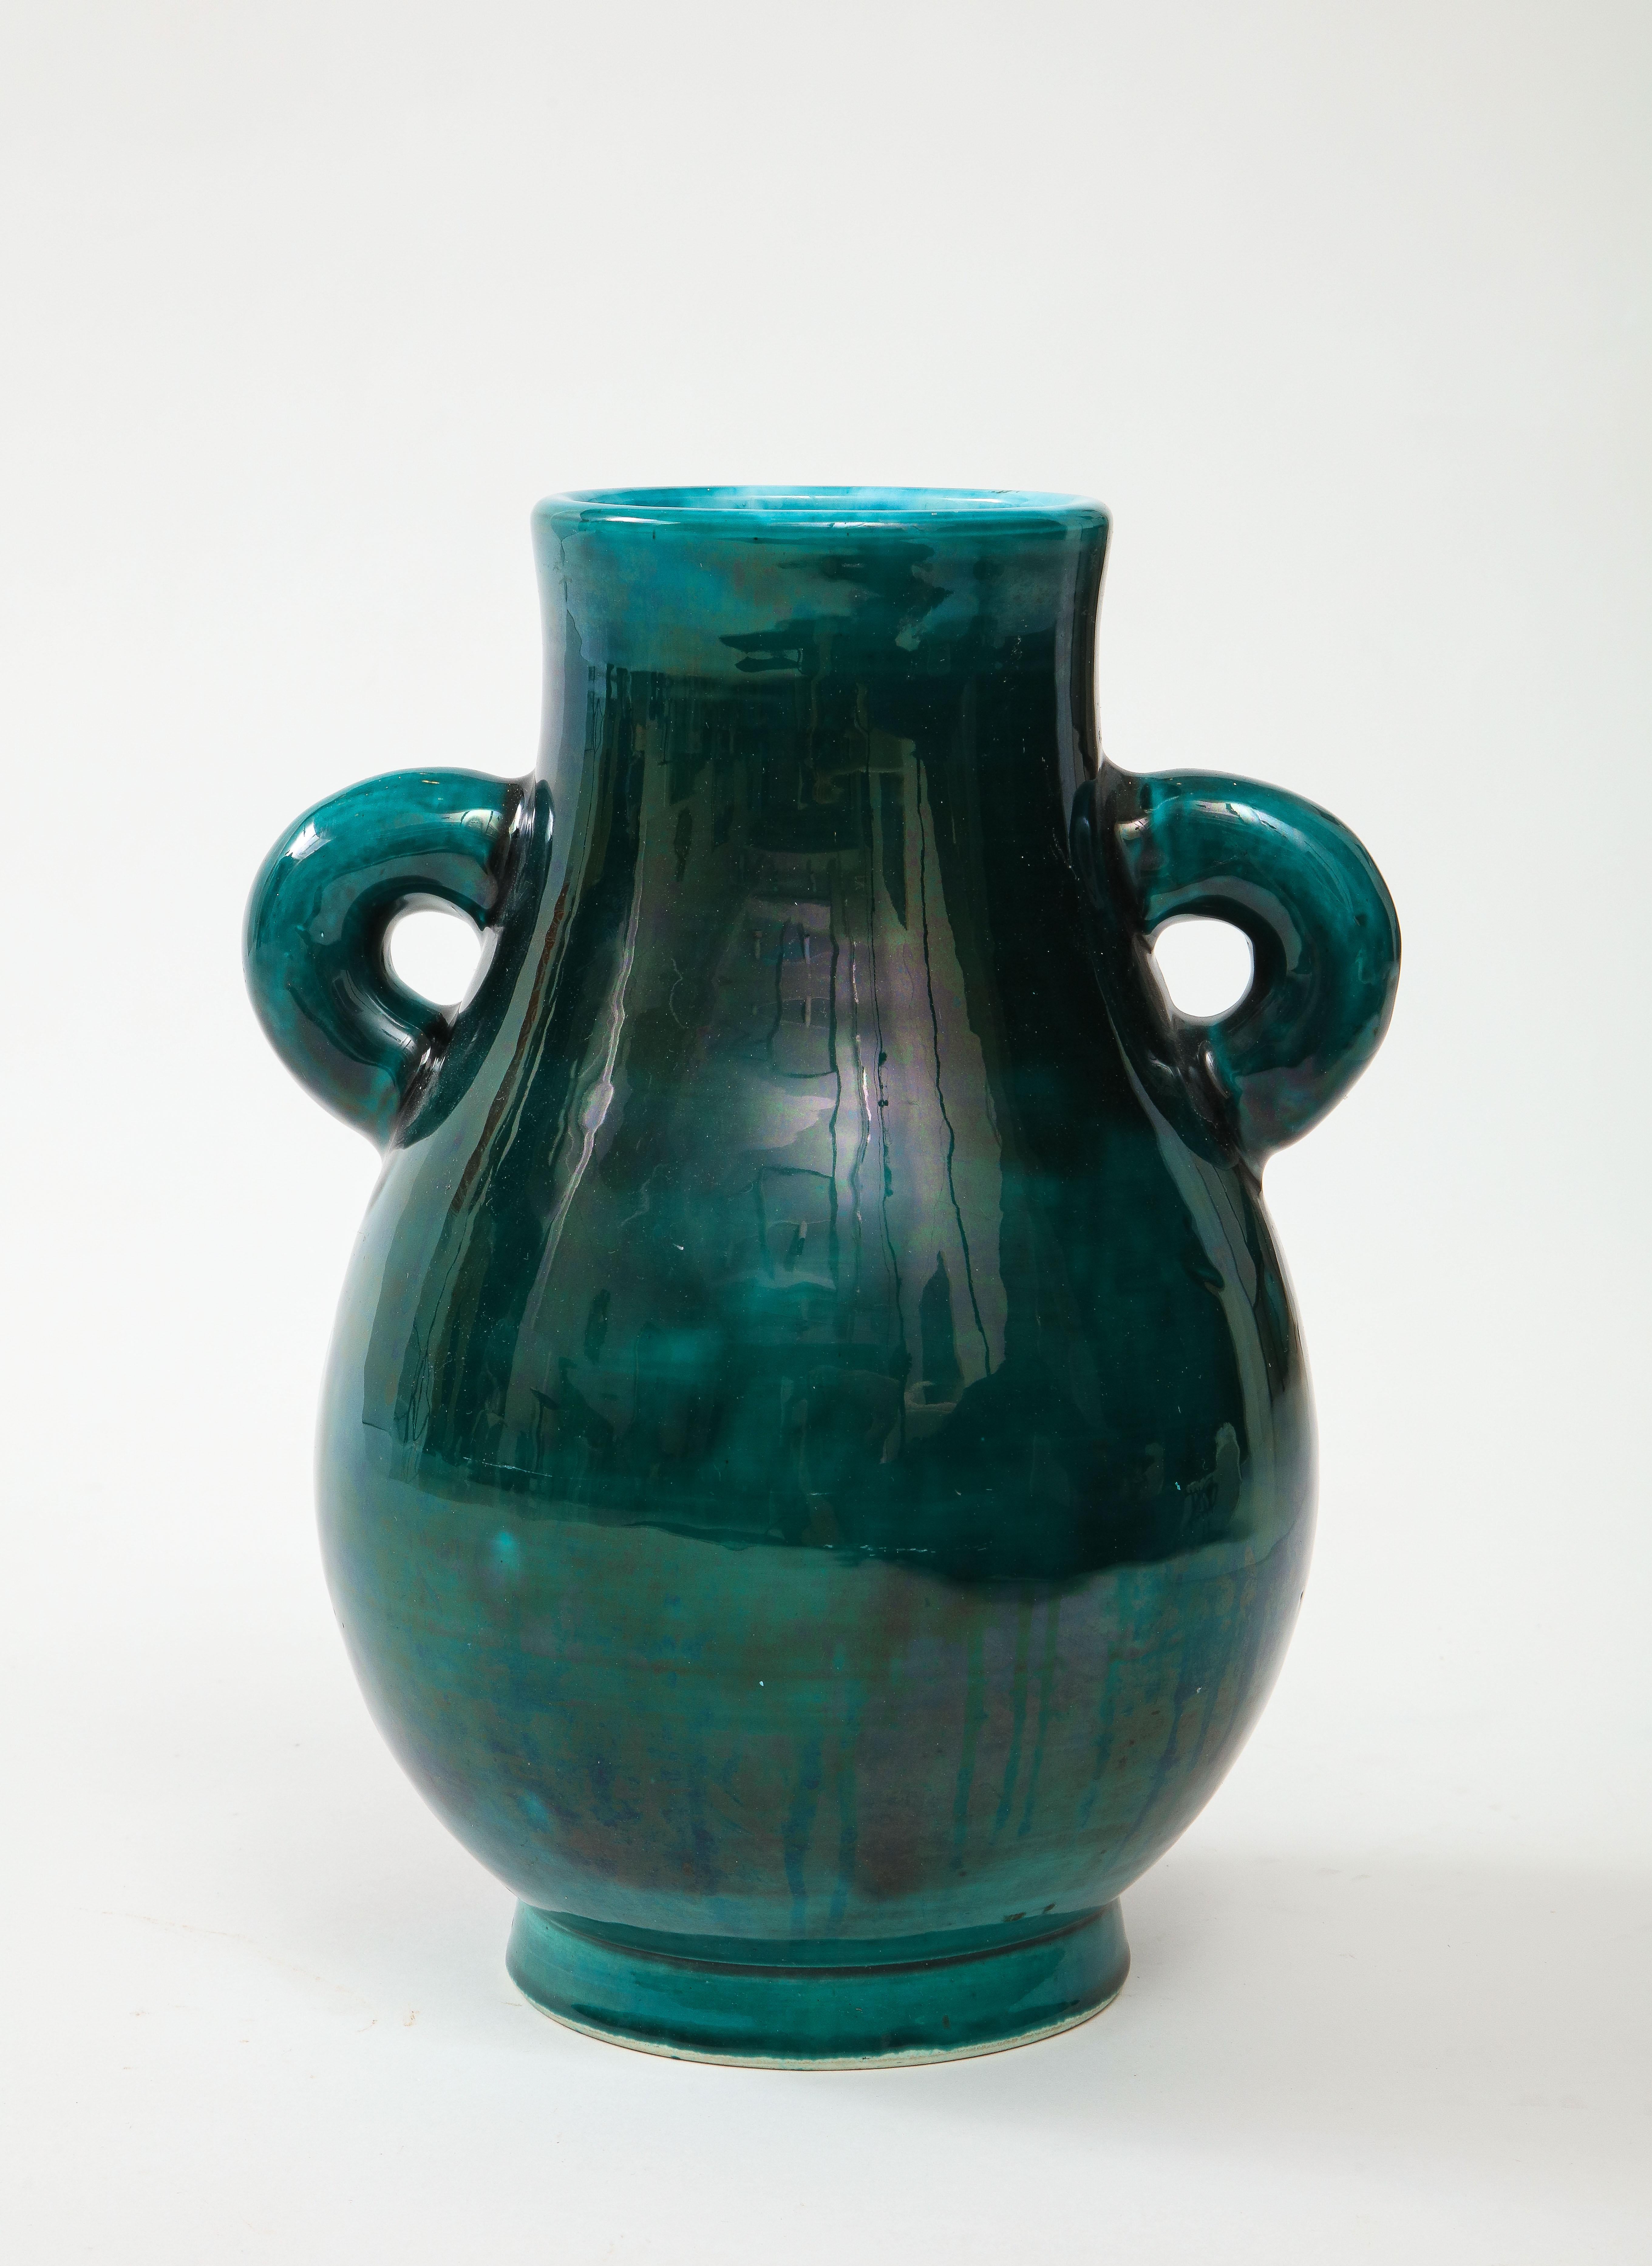 French mid century dark greenmottled glazed bouquet vase with a turquoise glazed interior and decoratve loop handles. Signed, Accolay.